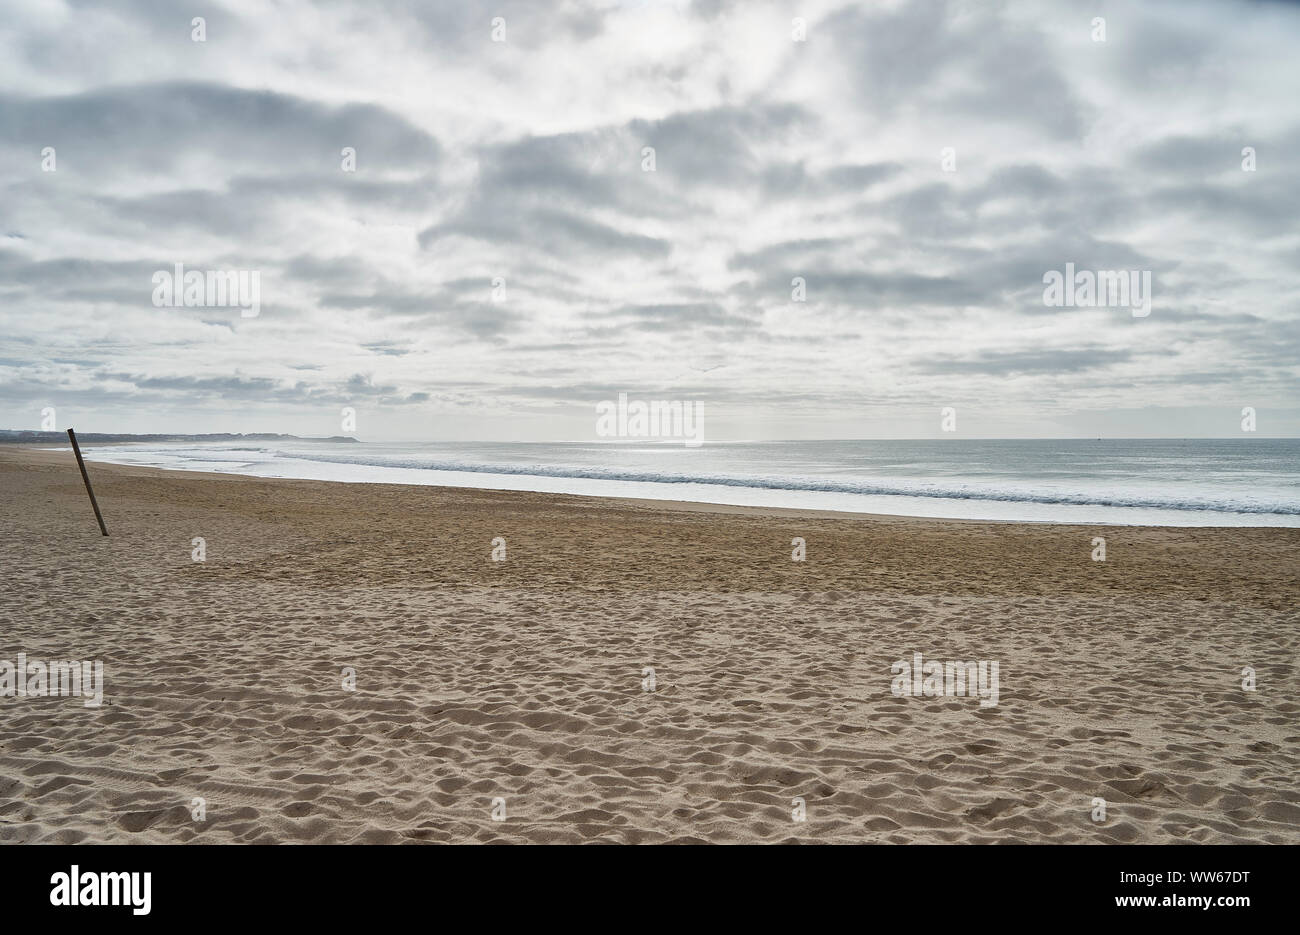 Beach by the sea, surf, waves, dark clouds Stock Photo